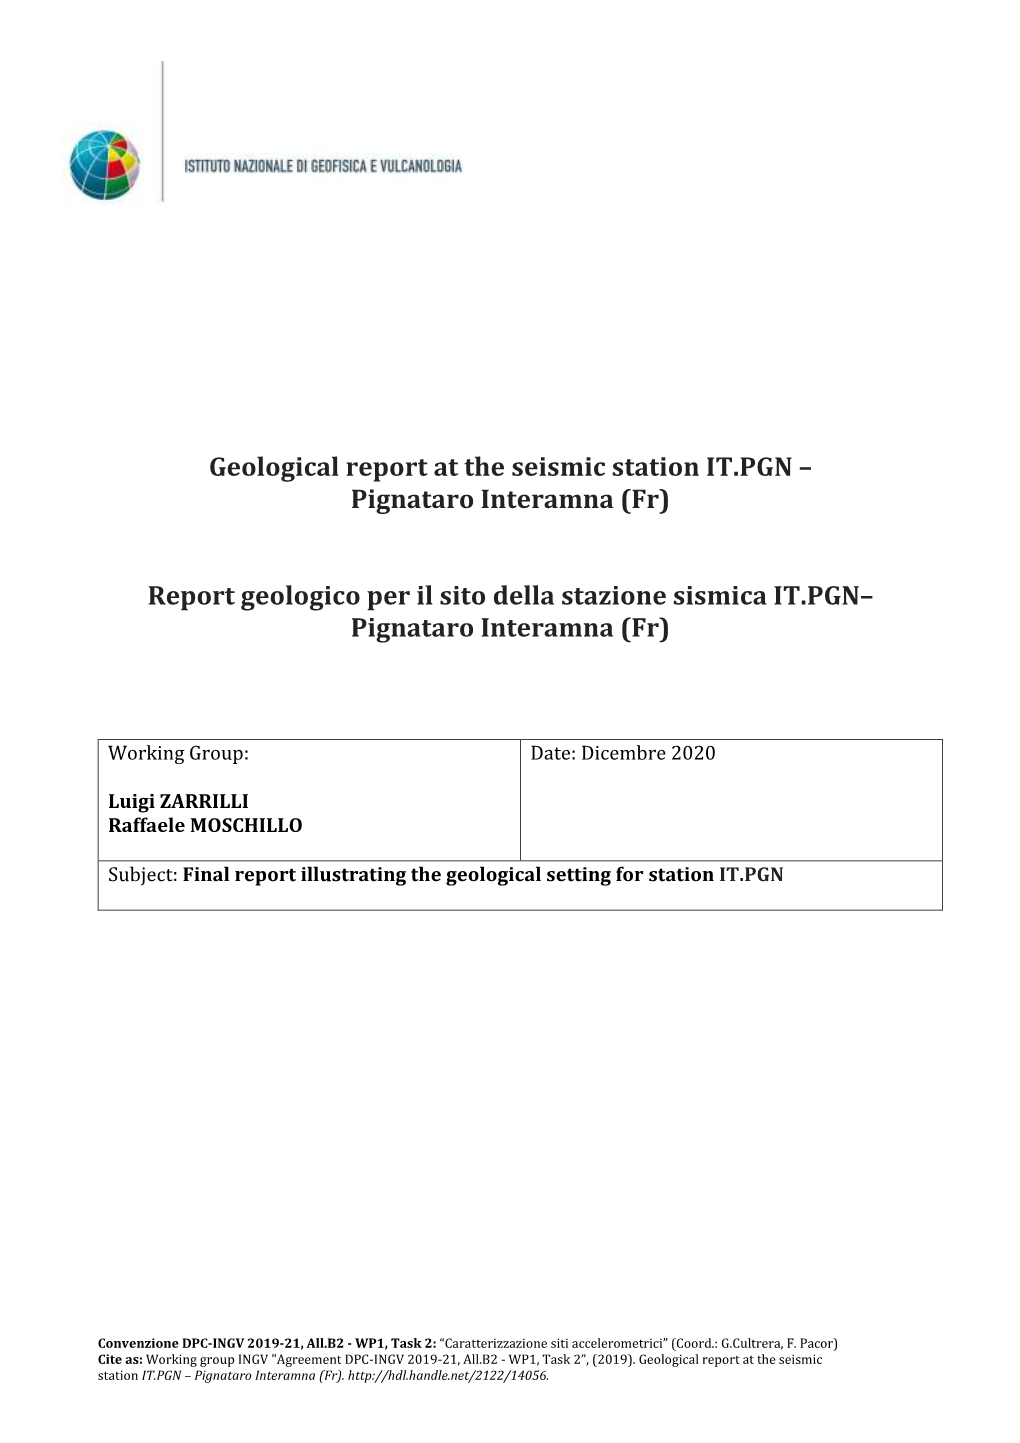 Geological Report at the Seismic Station IT.PGN – Pignataro Interamna (Fr)